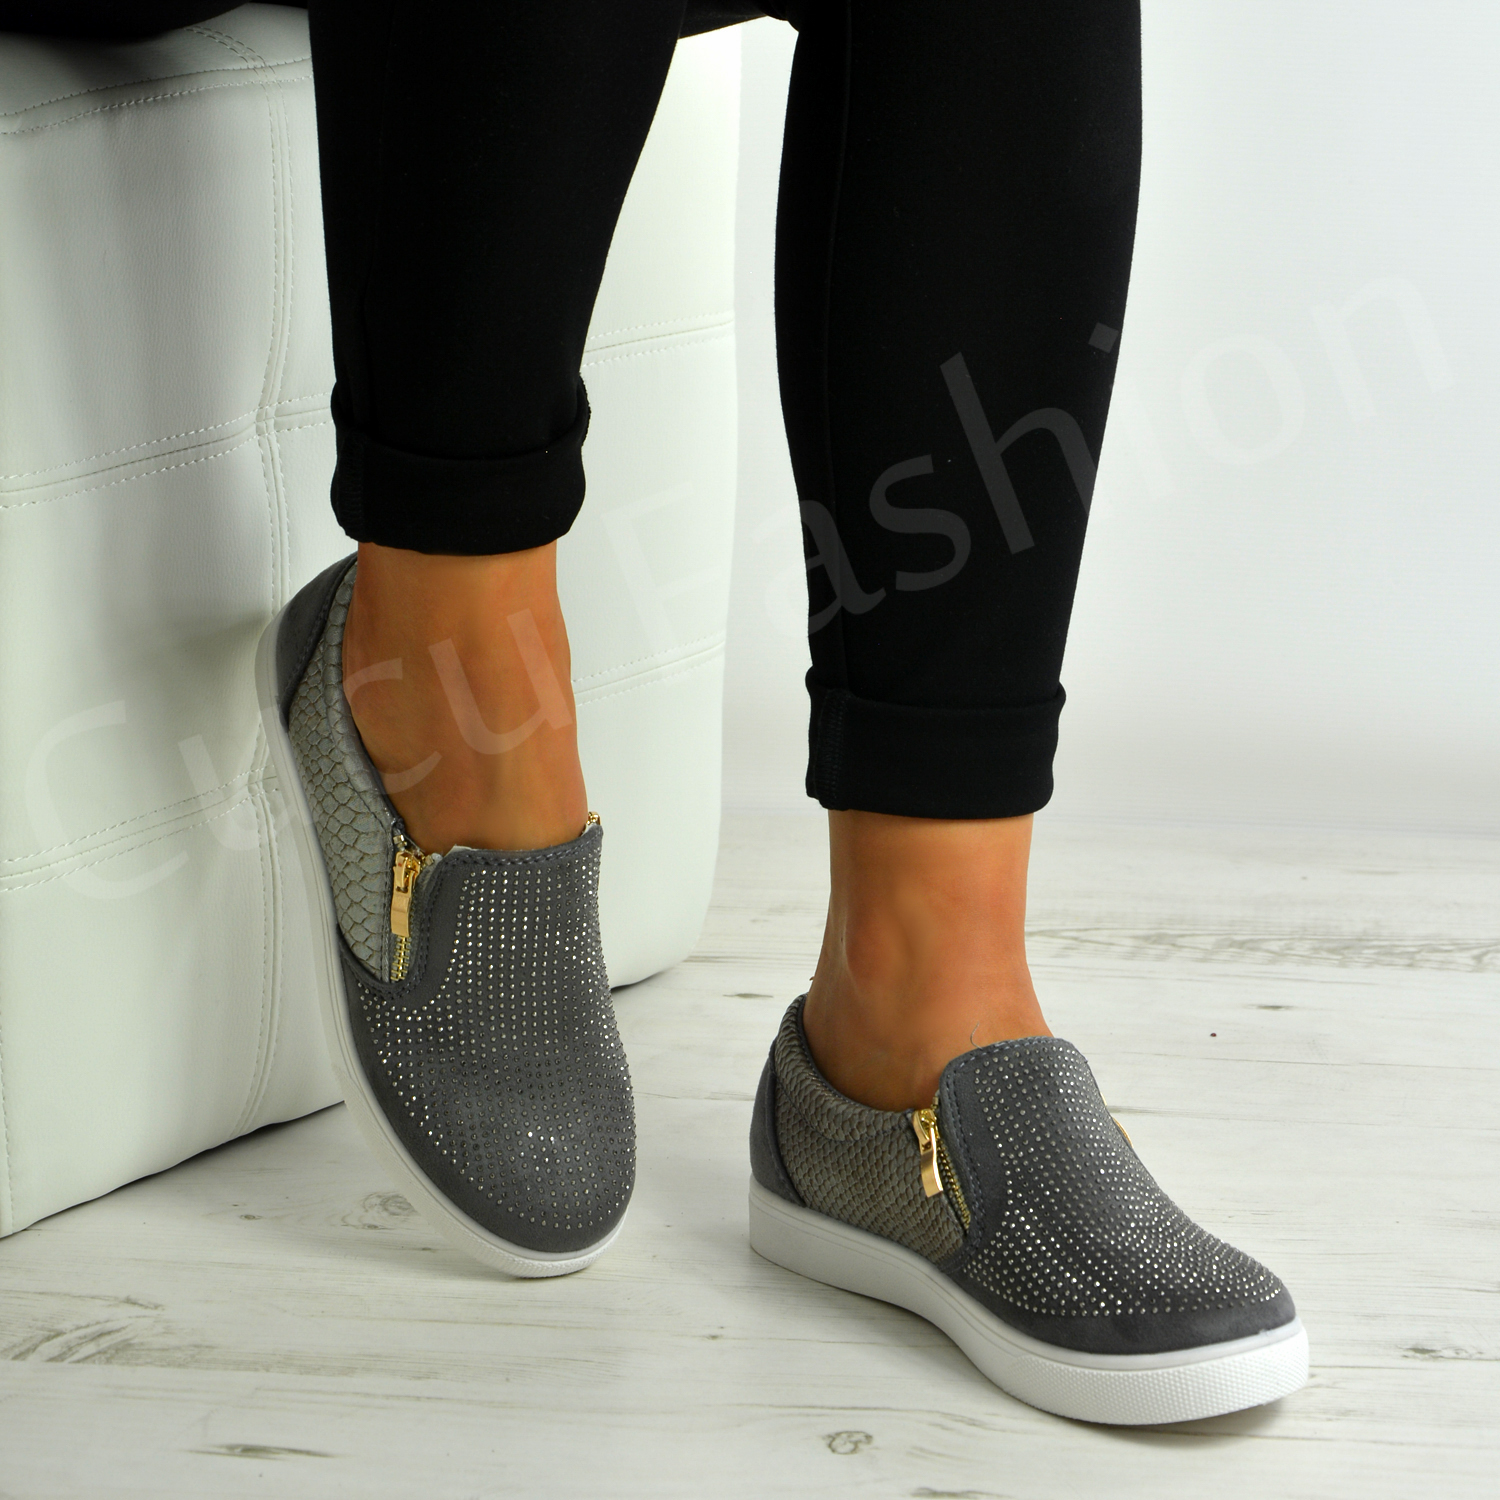 New Womens Ladies Slip On Studded Flat Trainers Zip Shoes Size Uk 3-8 ...